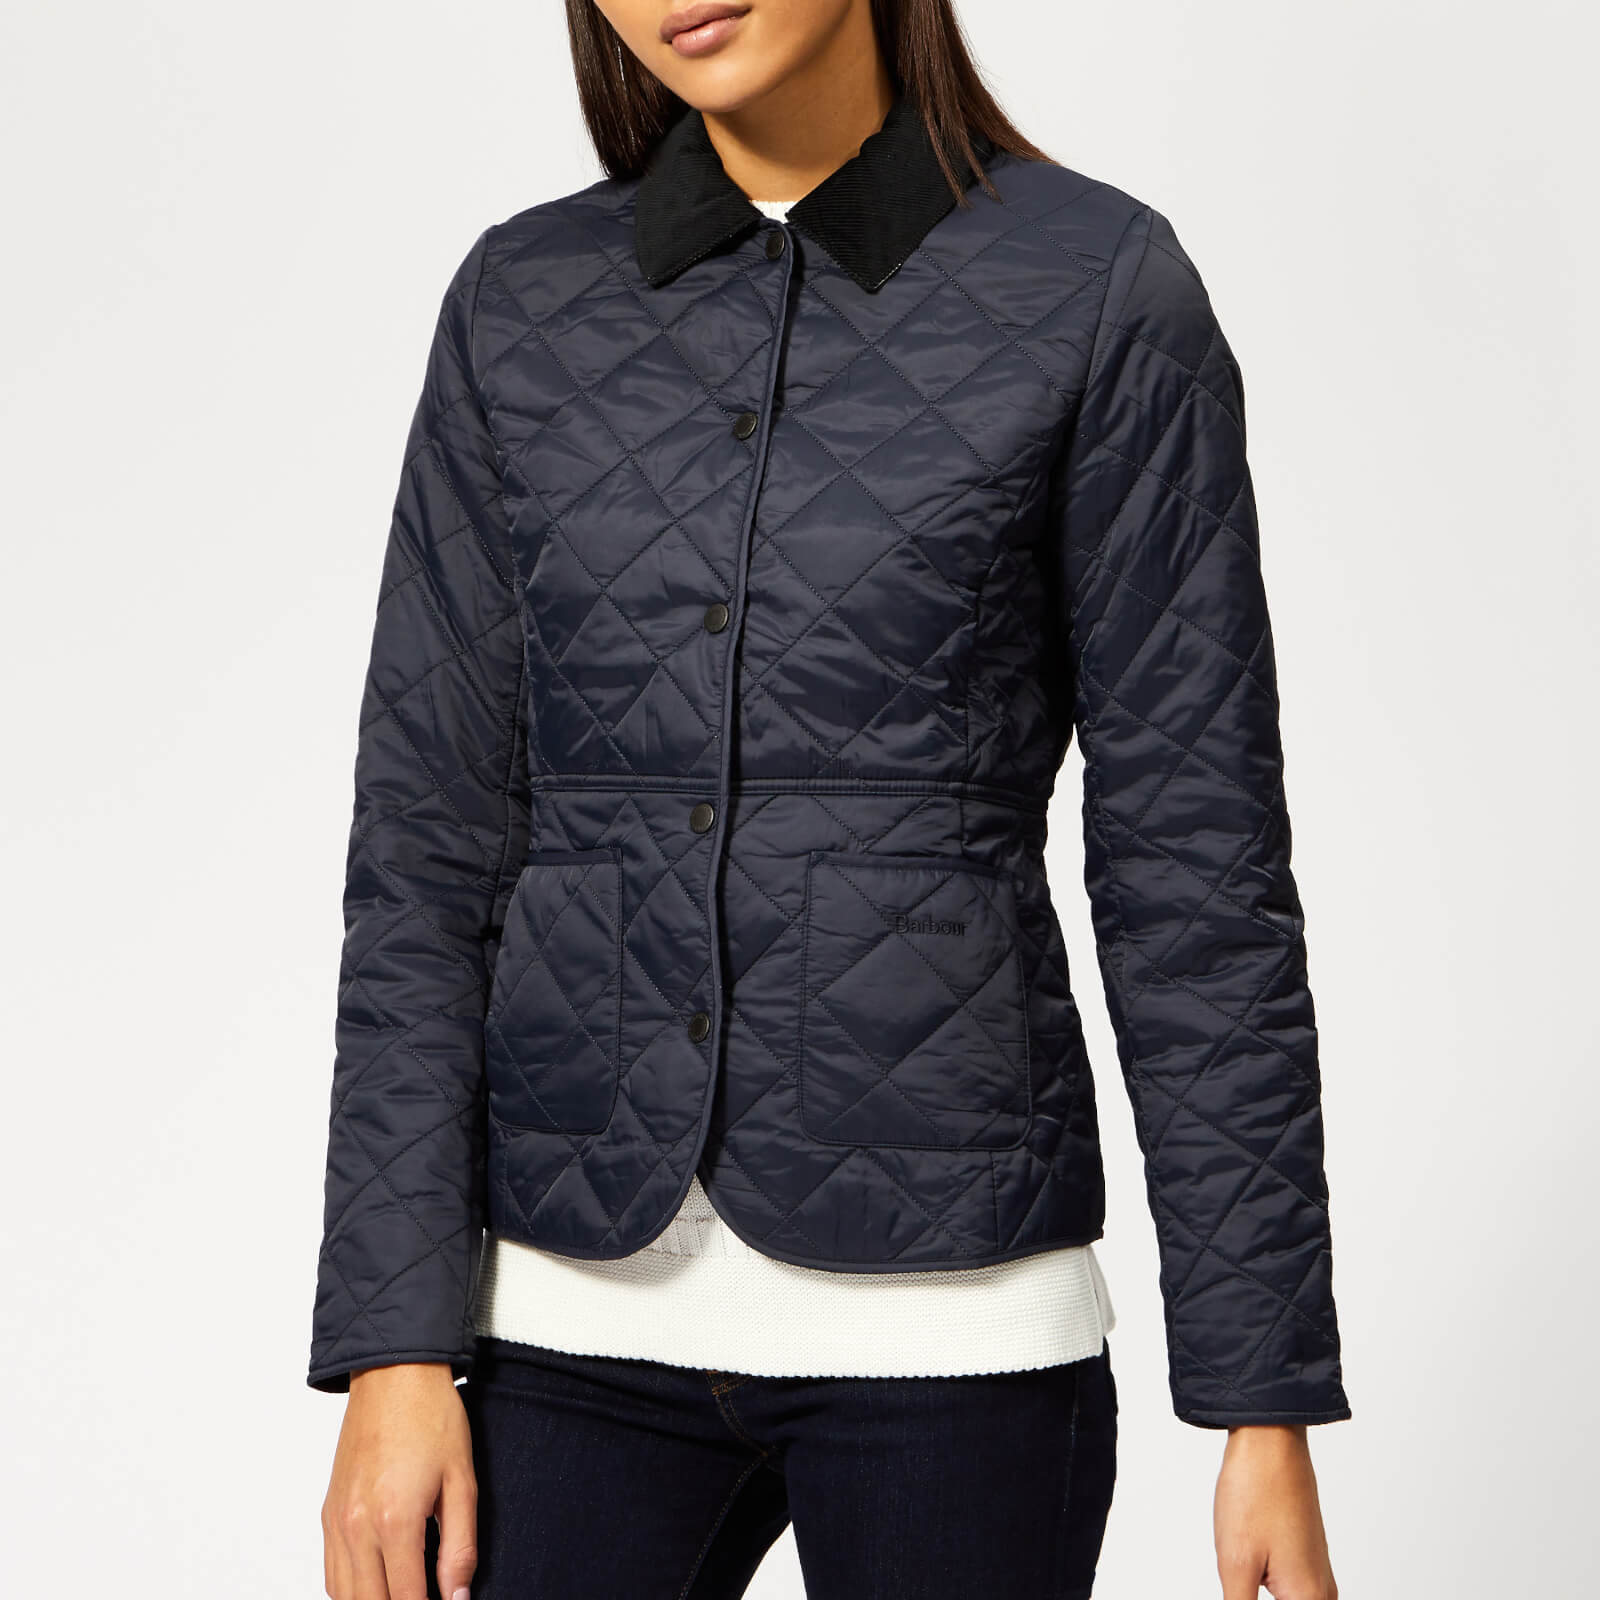 navy blue barbour jacket womens